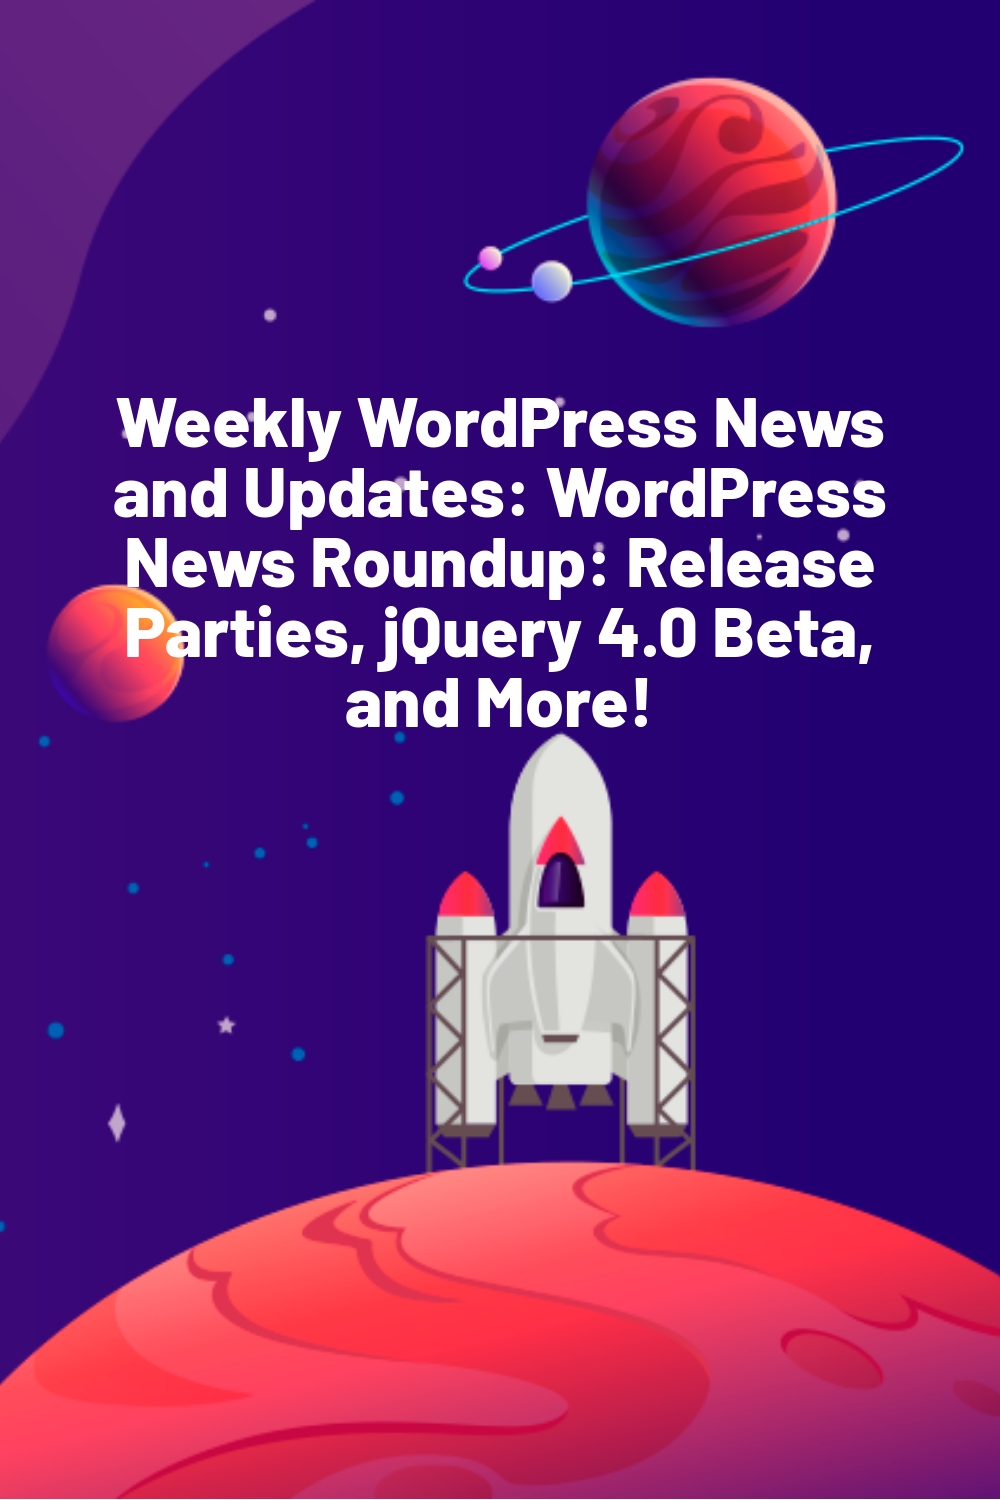 Weekly WordPress News and Updates: WordPress News Roundup: Release Parties, jQuery 4.0 Beta, and More!